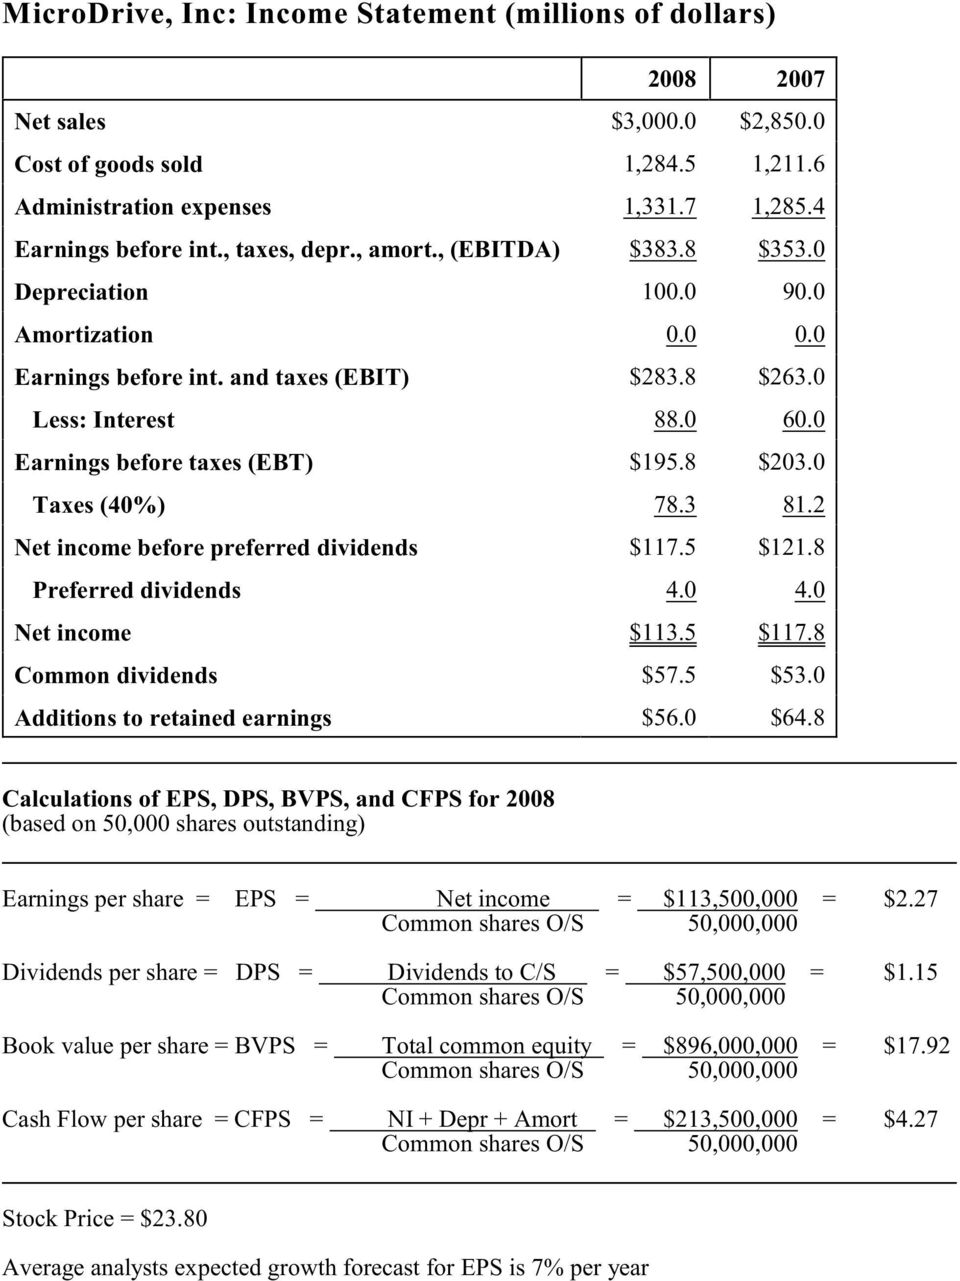 0 Earnings before taxes (EBT) $195.8 $203.0 Taxes (40%) 78.3 81.2 Net income before preferred dividends $117.5 $121.8 Preferred dividends 4.0 4.0 Net income $113.5 $117.8 Common dividends $57.5 $53.